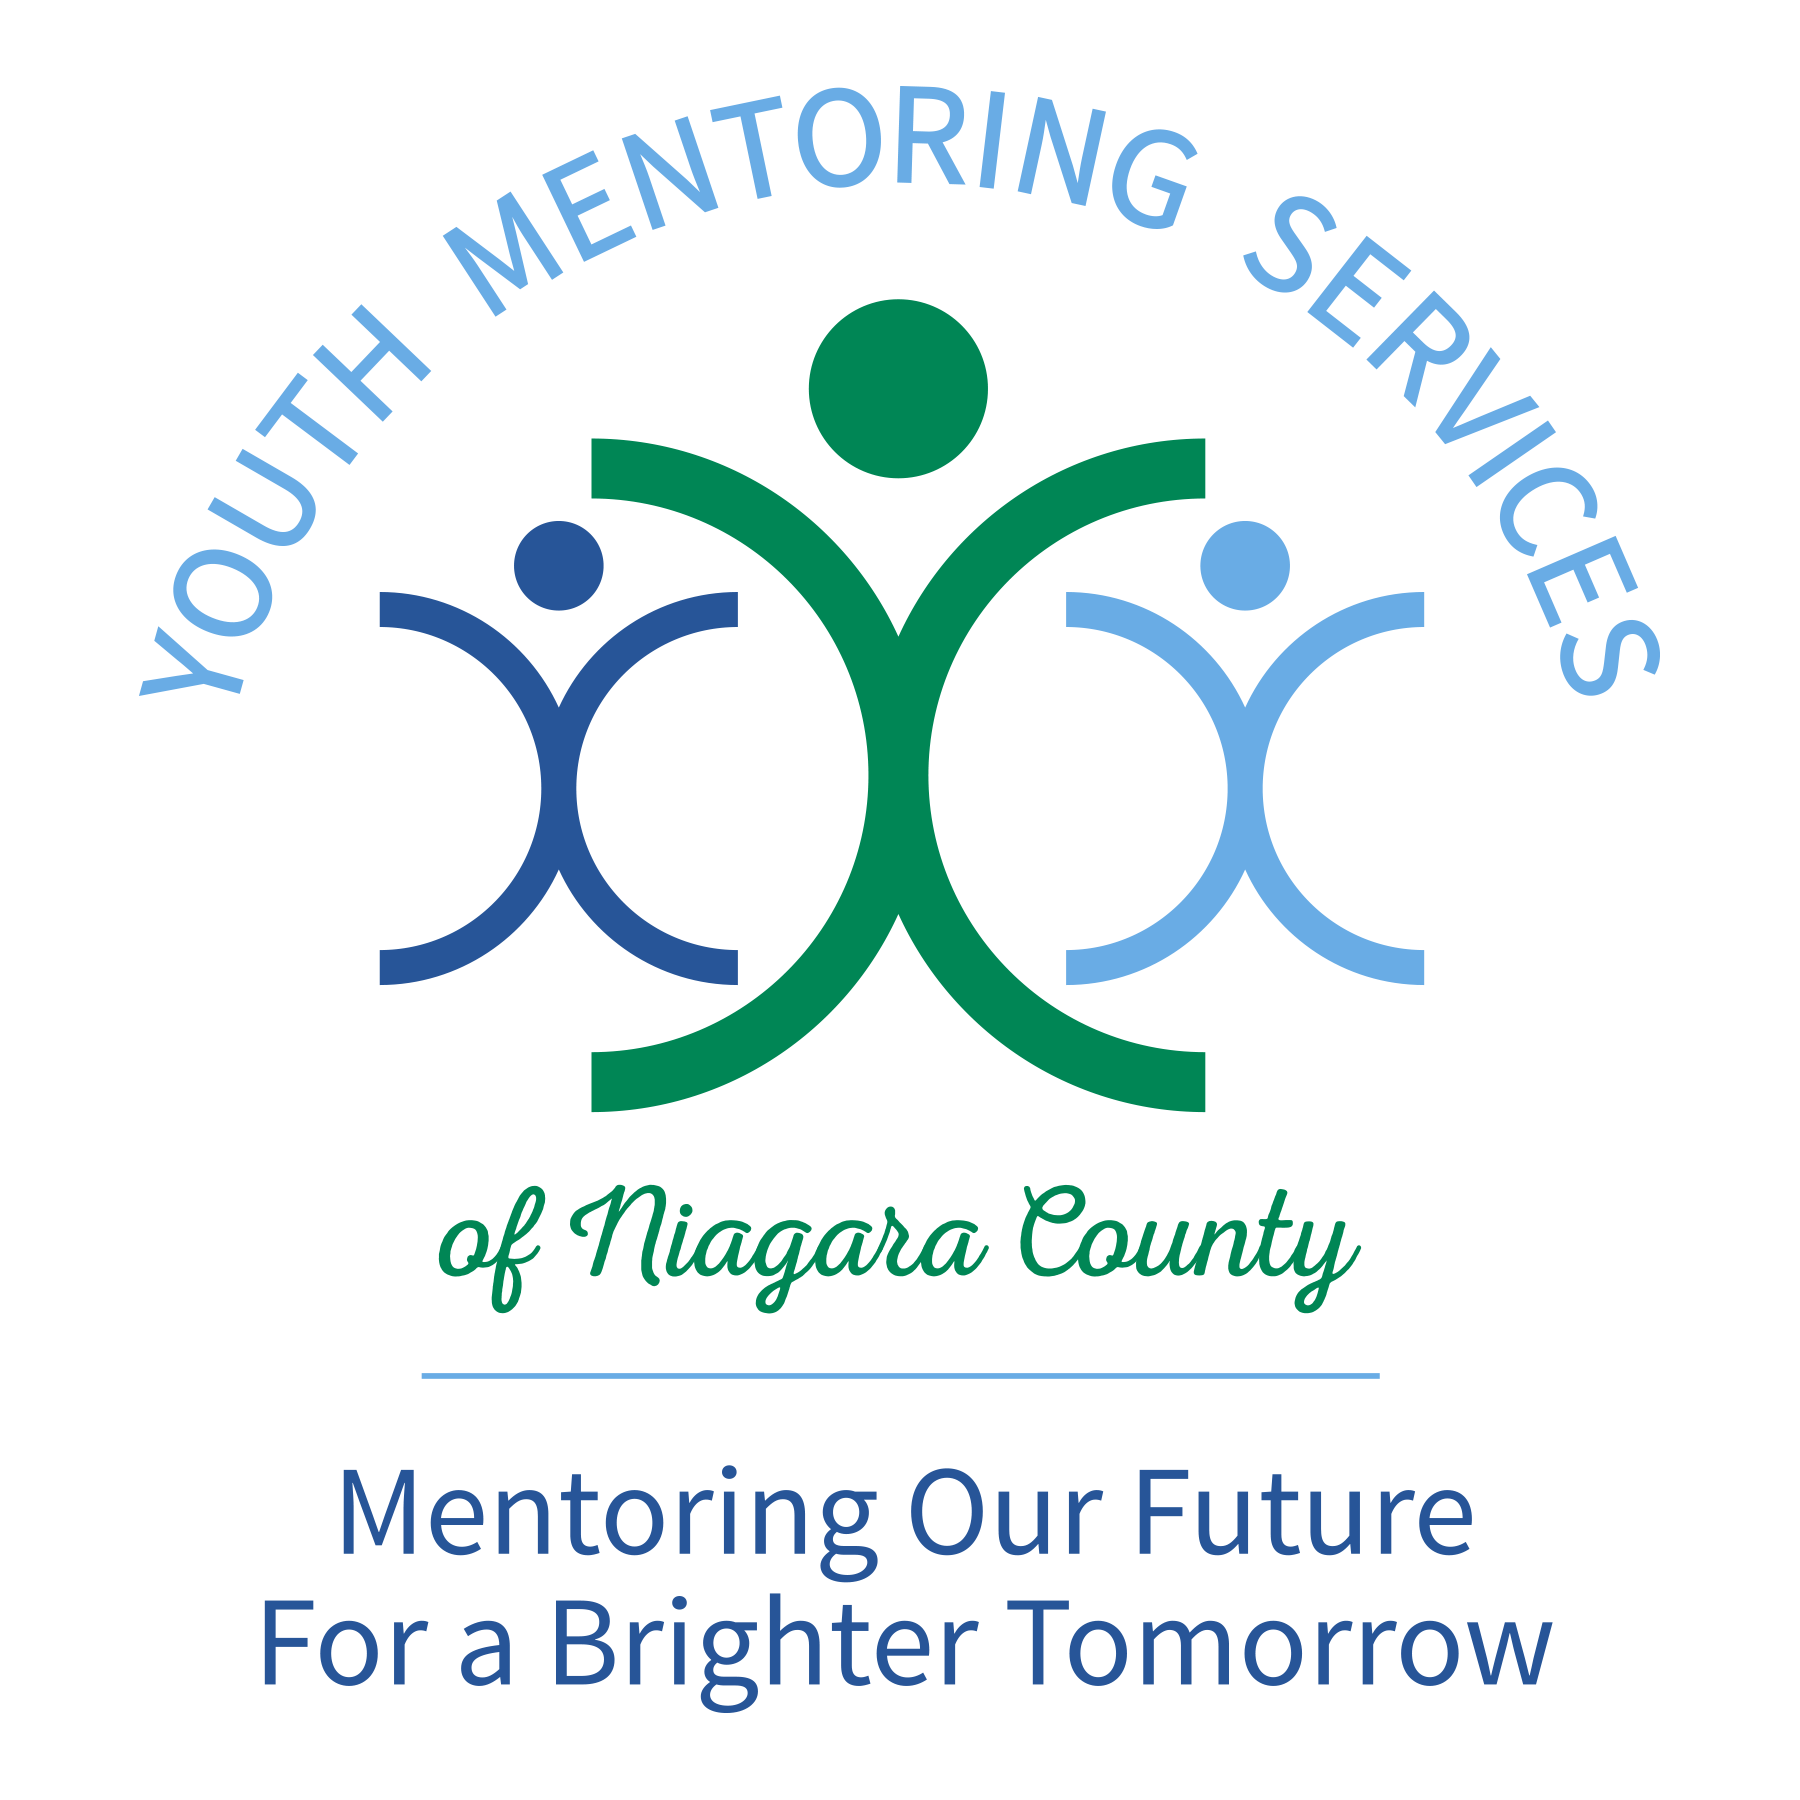 YMS - Youth Mentoring Services of Niagara County